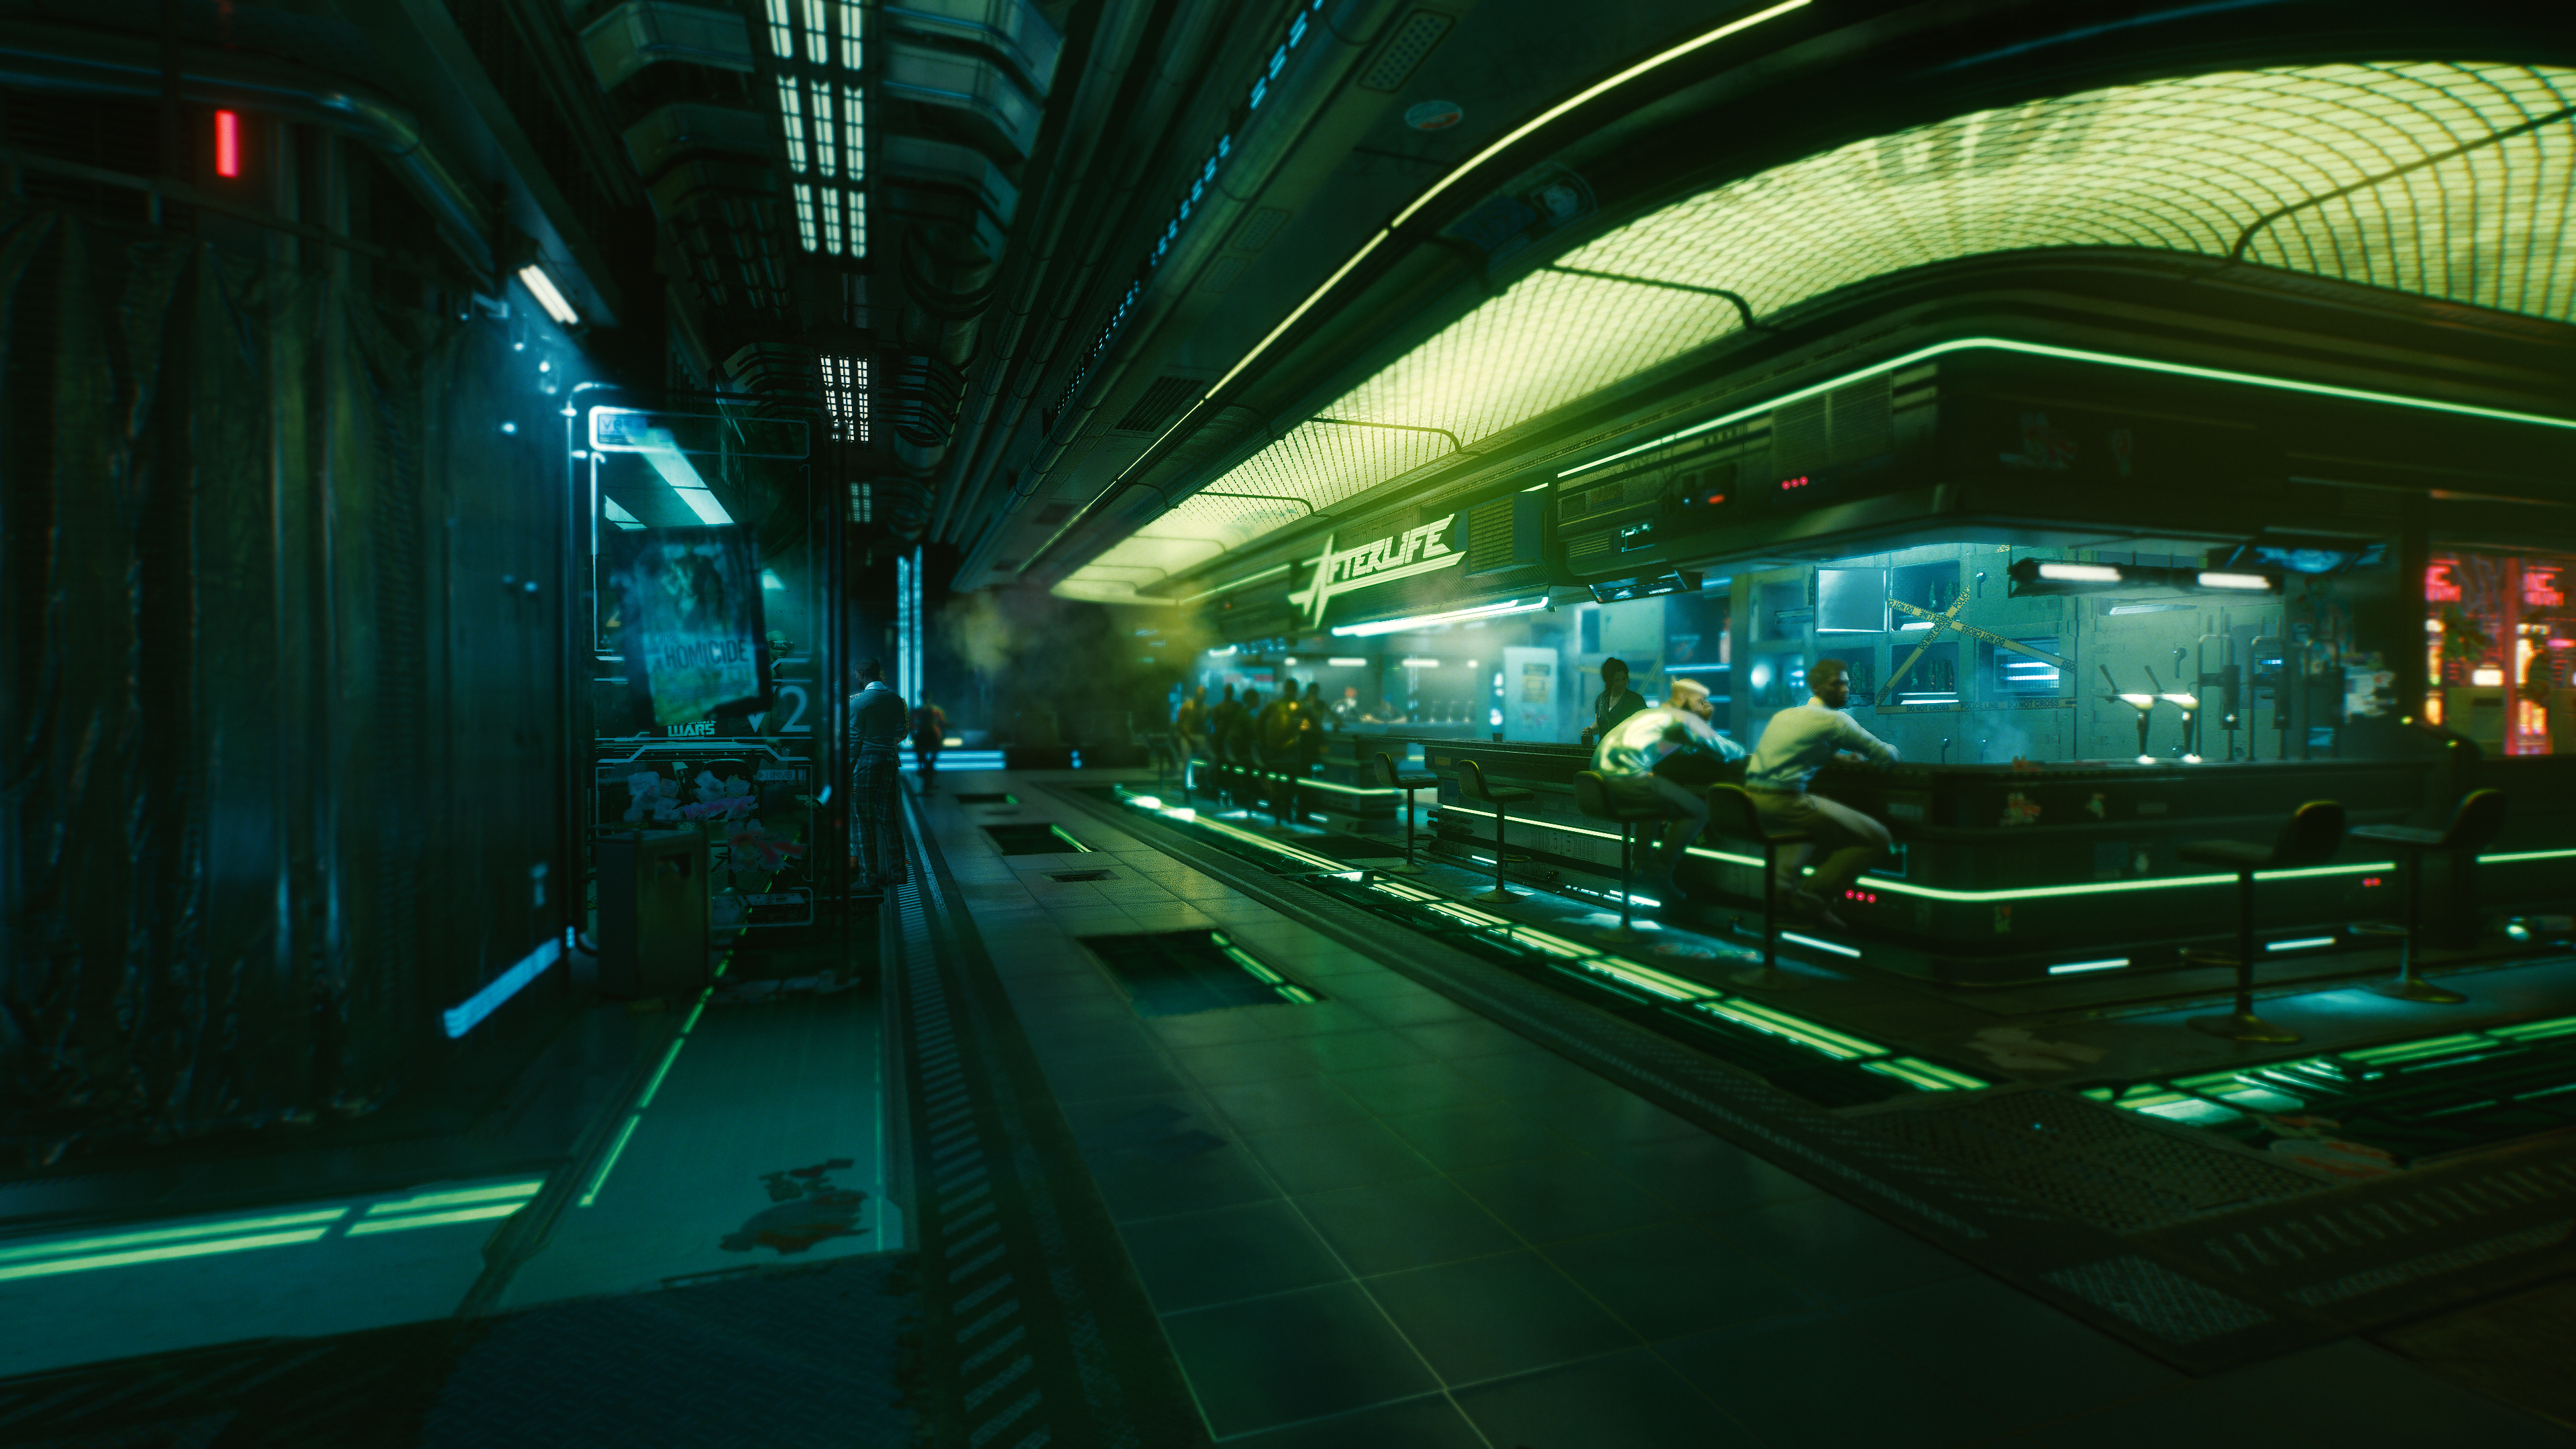 General 3840x2160 Cyberpunk 2077 video games lights neon pub afterlife space bartender underground street cyber science fiction futuristic futuristic city people urban relaxing bar